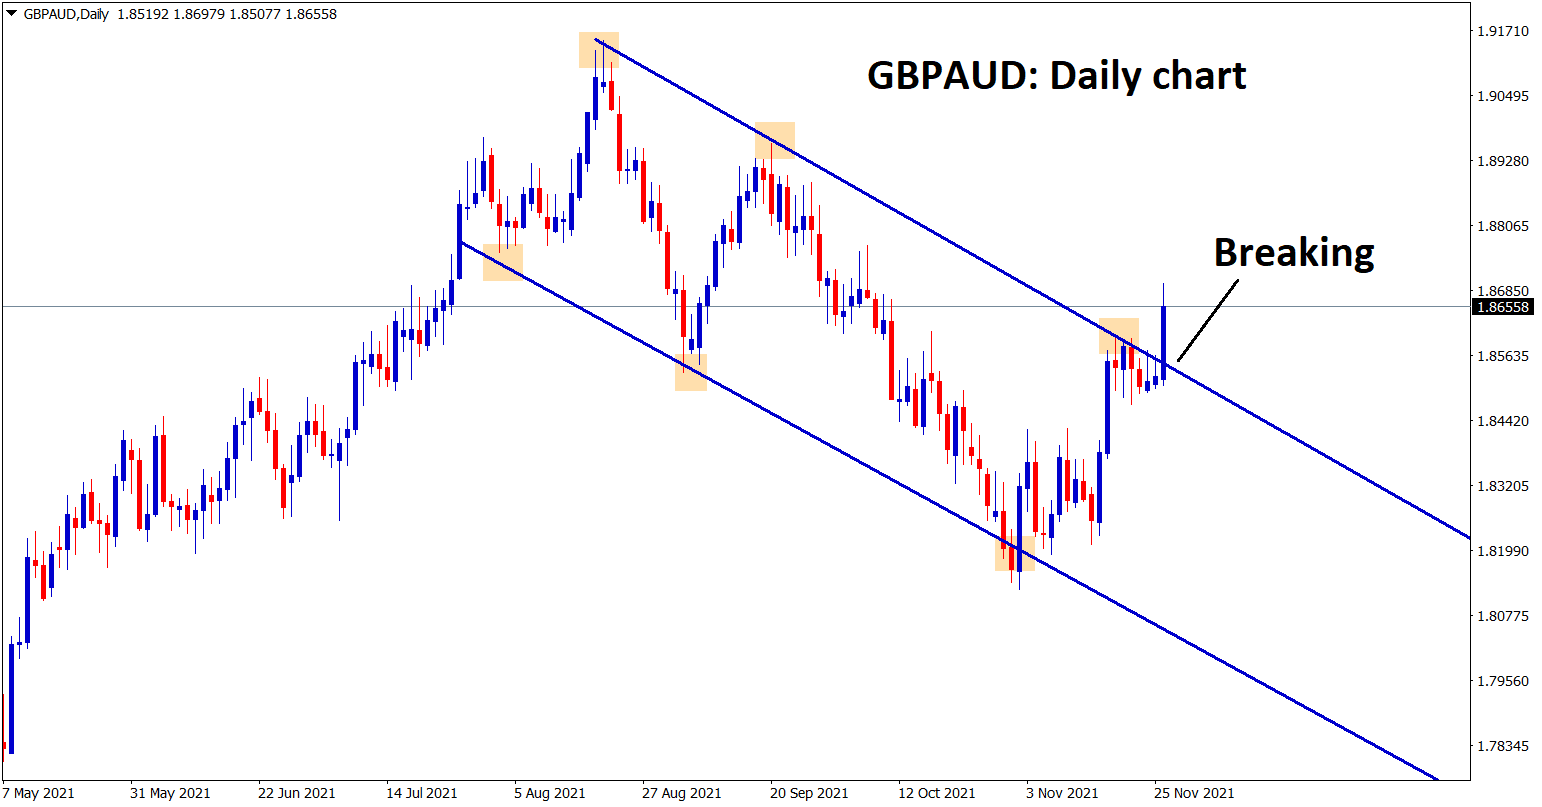 GBPAUD has broken the lower high top of the descending channel in the daily timeframe chart